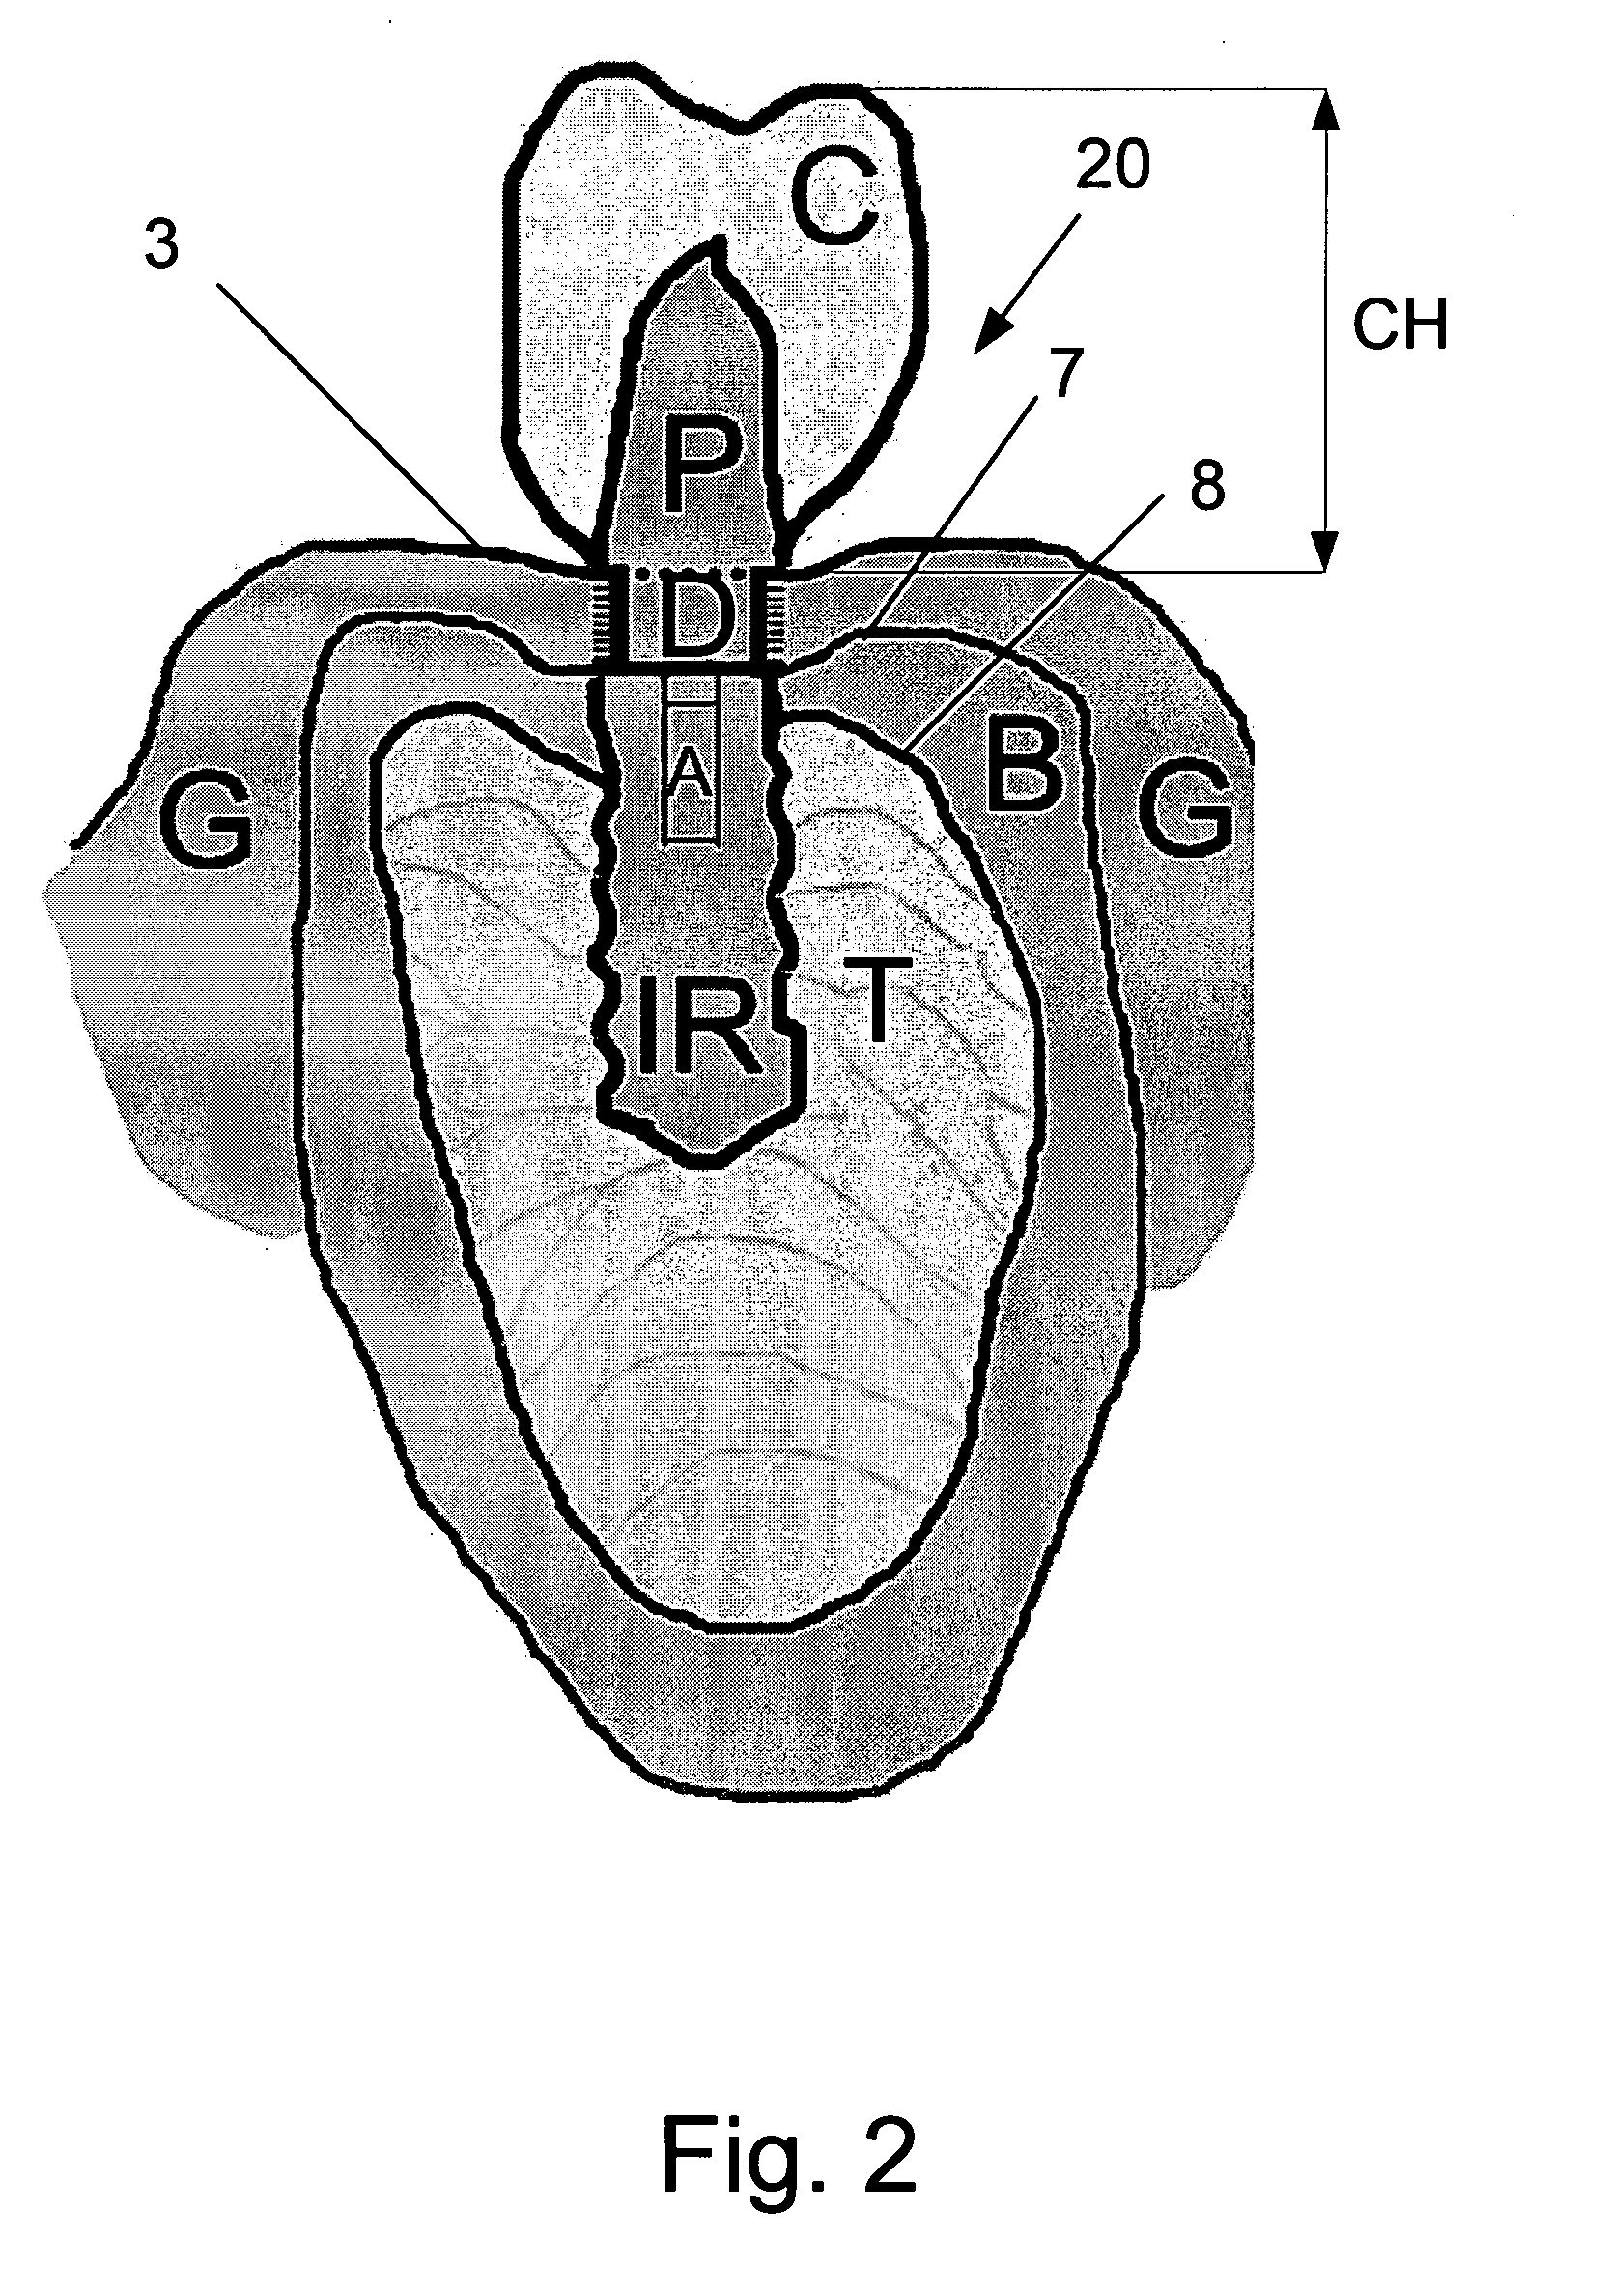 Device and Method for Gingival Attachment Associated with Endosseous Implants